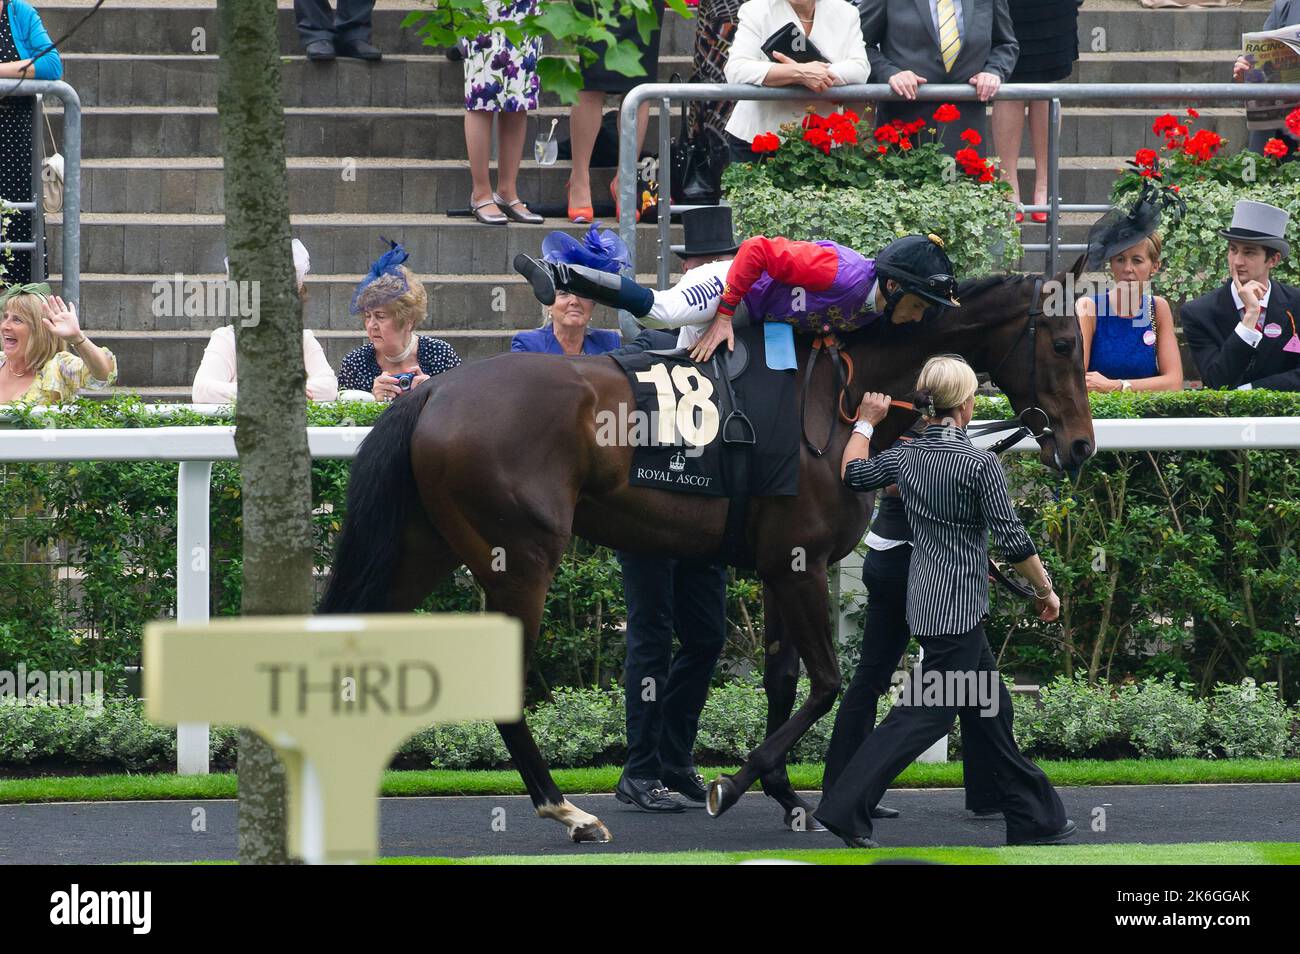 Ascot, Berkshire, UK. 20th June, 2013. Ryan Moore mounts horse Estimate before winning the Ascot Gold Cup. This was an historic day as it was the first time a reigning monarch had won the Gold Cup. Estimate was ridden by jockey Ryan Moore. Queen Elizabeth II was due to the presentation for the Gold Cup but her son, the Duke of York did the presentation instead. Issue Date: 14th October 2022. Credit: Maureen McLean/Alamy Stock Photo